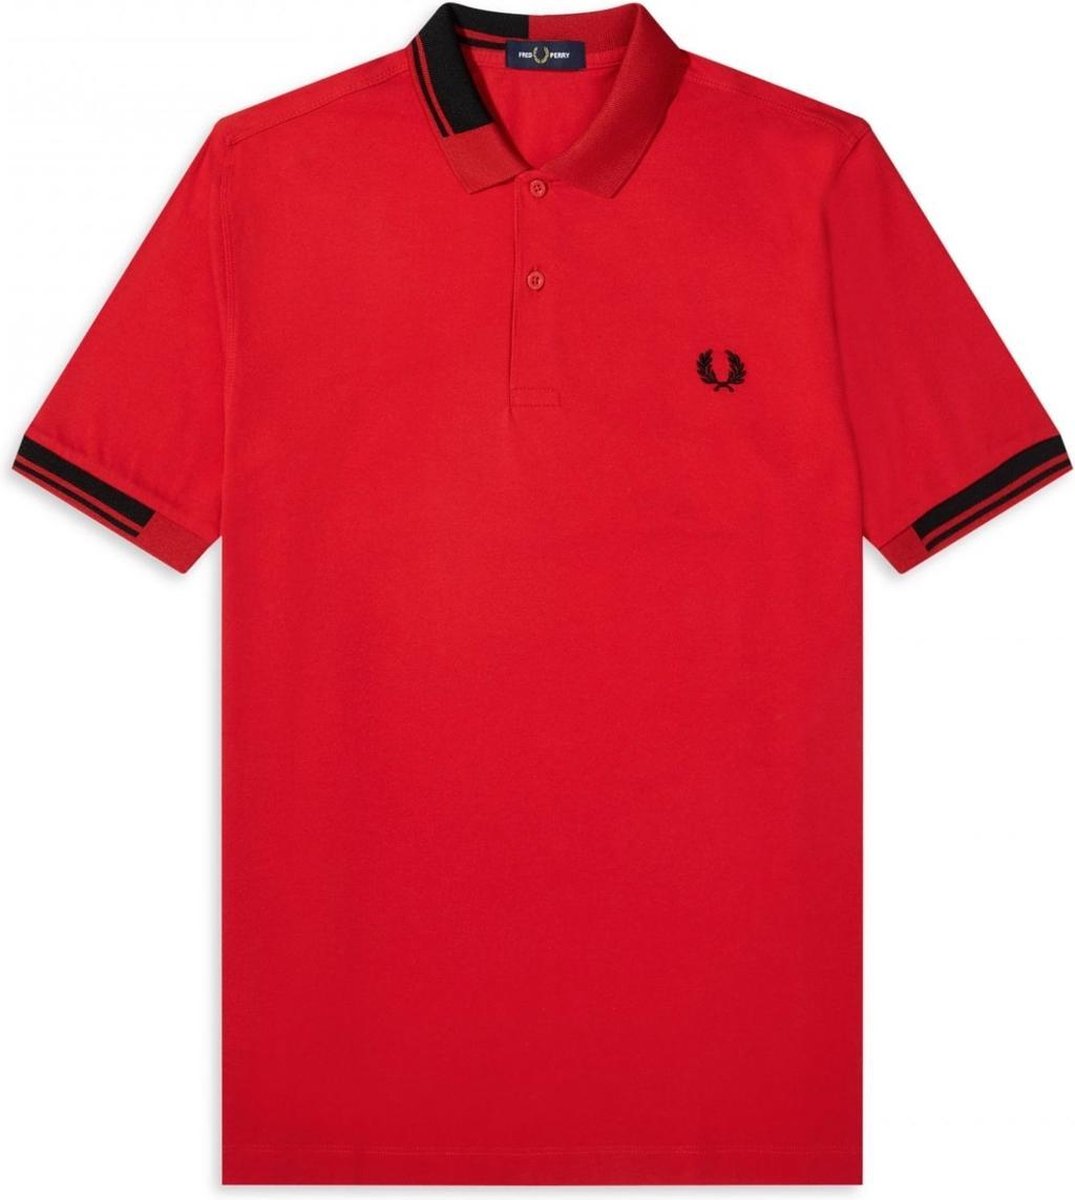 Fred Perry - Abstract Collar Polo Shirt - Rode Polo - M - Rood